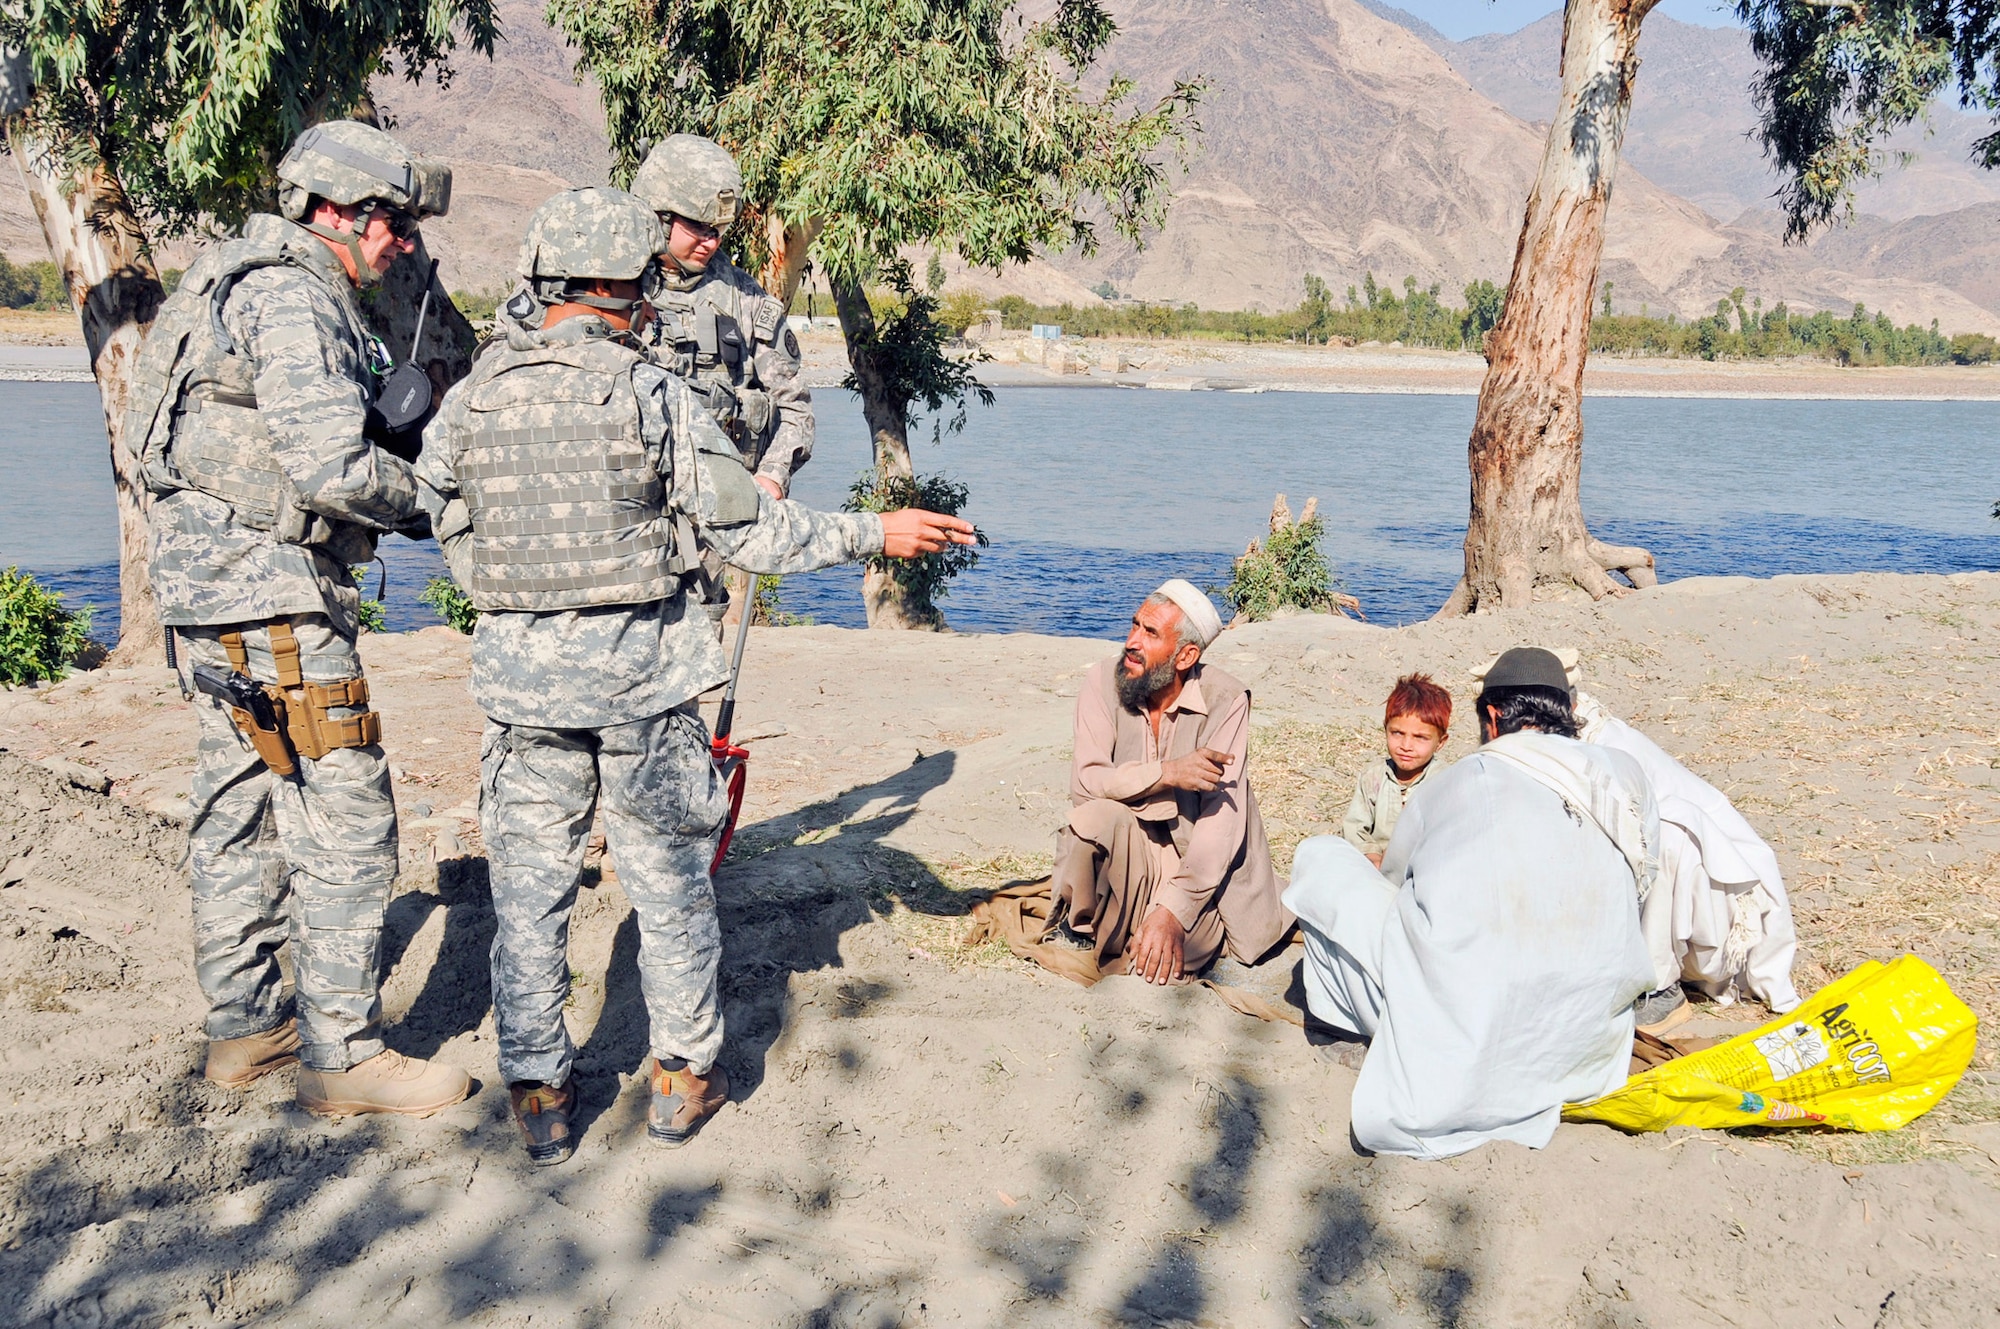 Air Force Chief Master Sgt. Don Kuehl (left), Air Force Staff Sgt. Bennett Groth and an interpreter talk with three farmers planting alfalfa at the proposed site of a demonstration farm near the Sarkani District Center in Kunar province, Nov. 22. (U.S. Air Force photo by Capt. Peter Shinn)